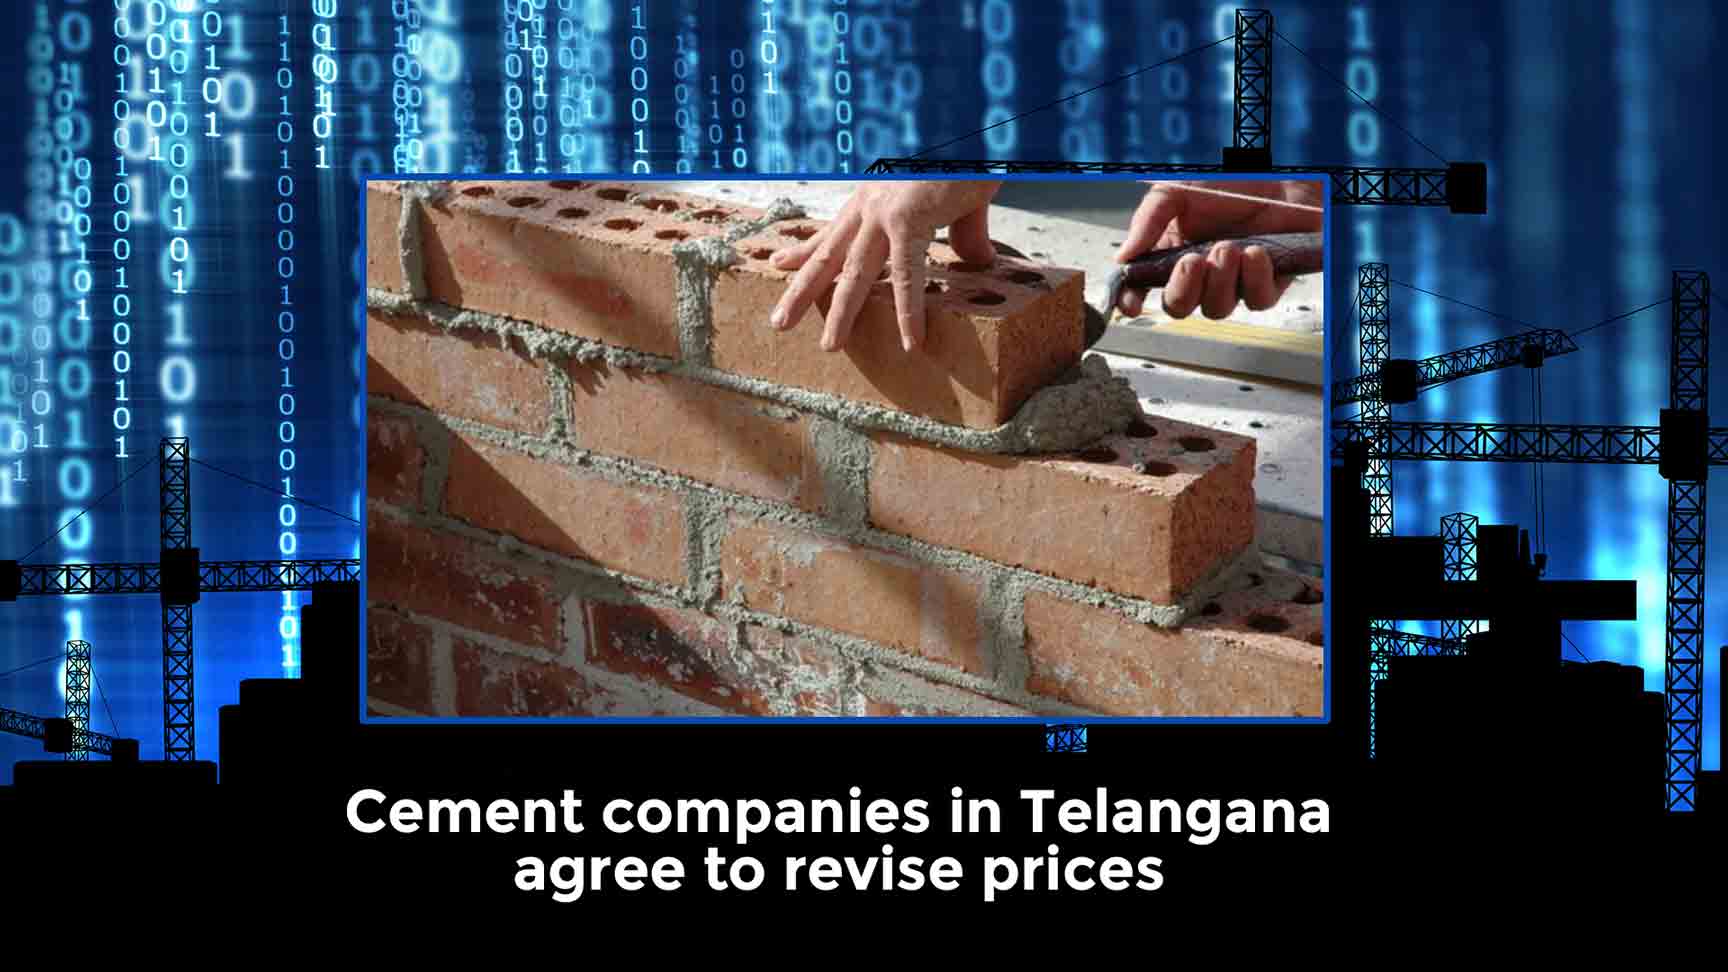 Cement Manufacturing Companies Agree To Revise Prices: Telangana